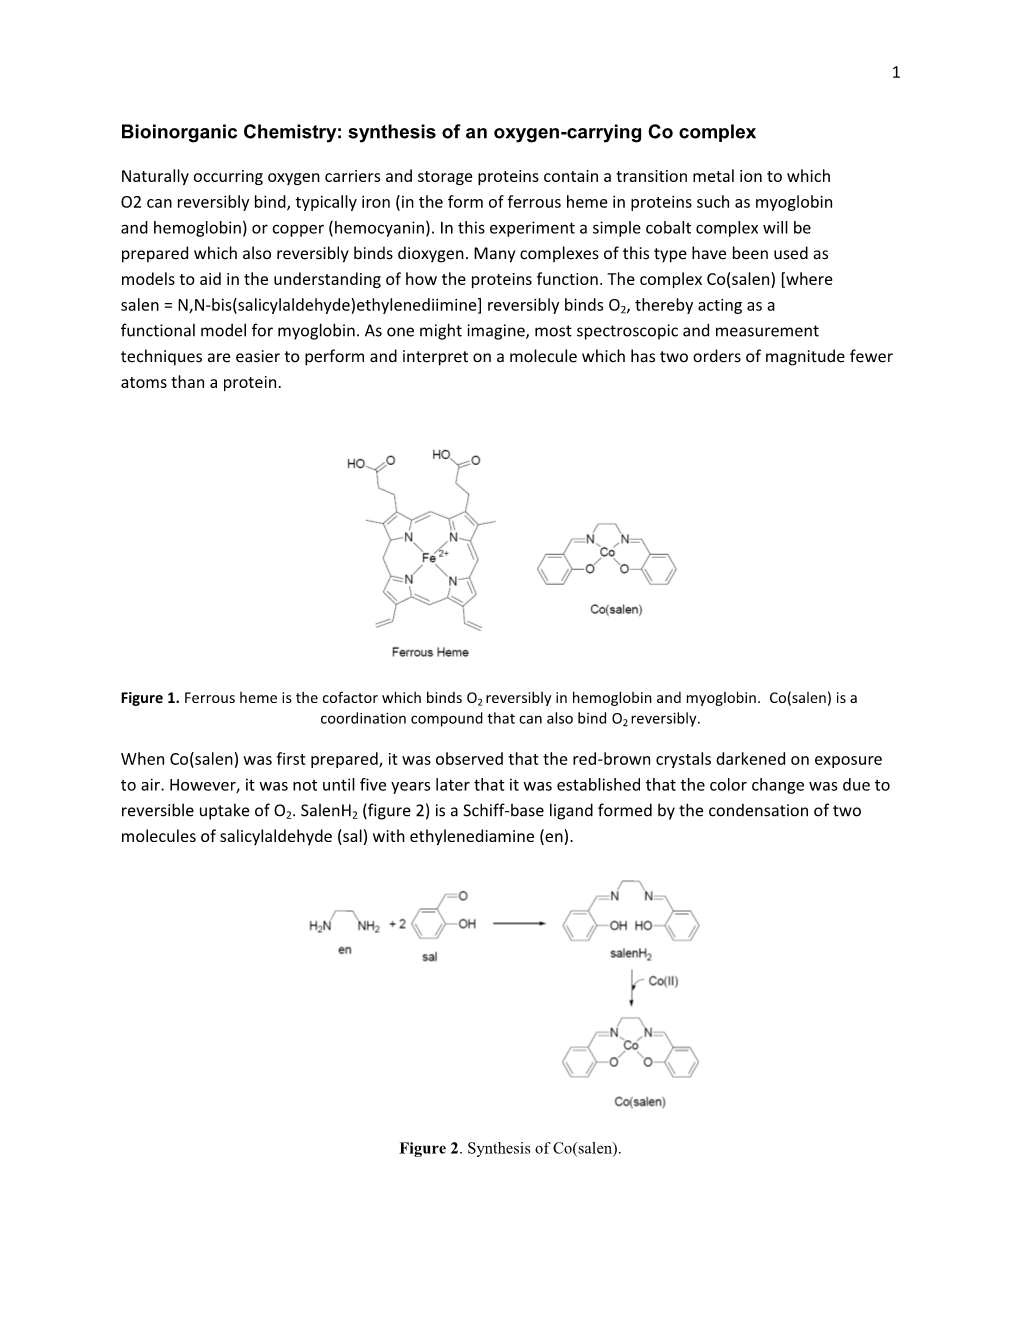 Bioinorganic Chemistry: Synthesis of an Oxygen-Carrying Co Complex